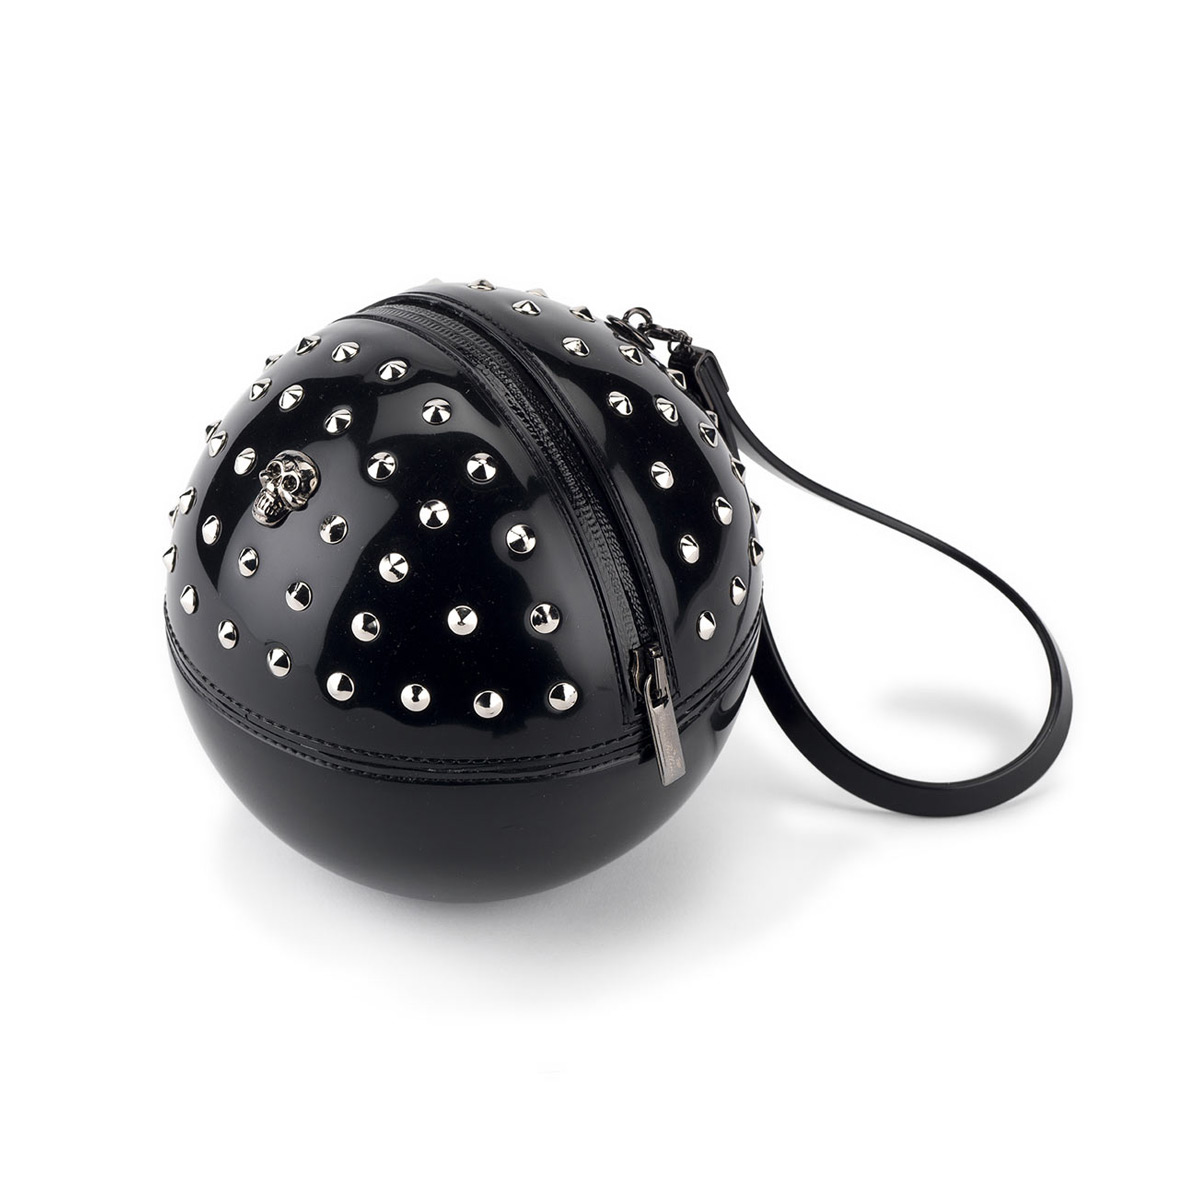 "Rock'n'ball" studded Sphere bag in bright pvc